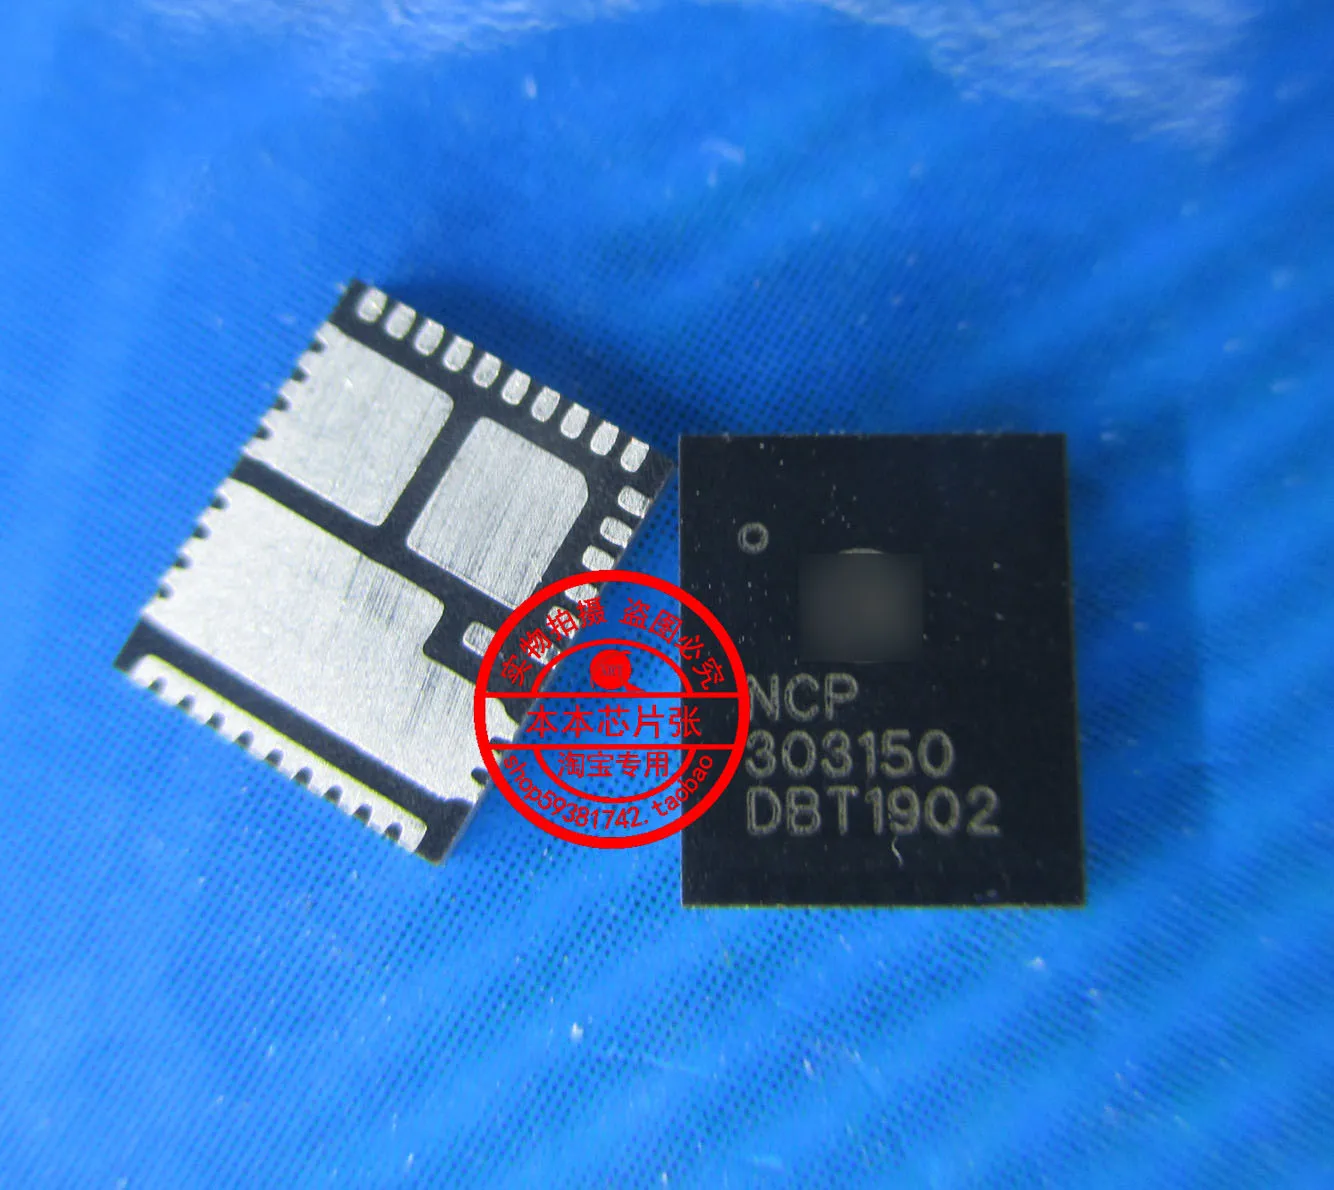 

2PCS/lot NCP303150MNTWG NCP303150 303150 P303150 QFN 100% new imported original IC Chips fast delivery